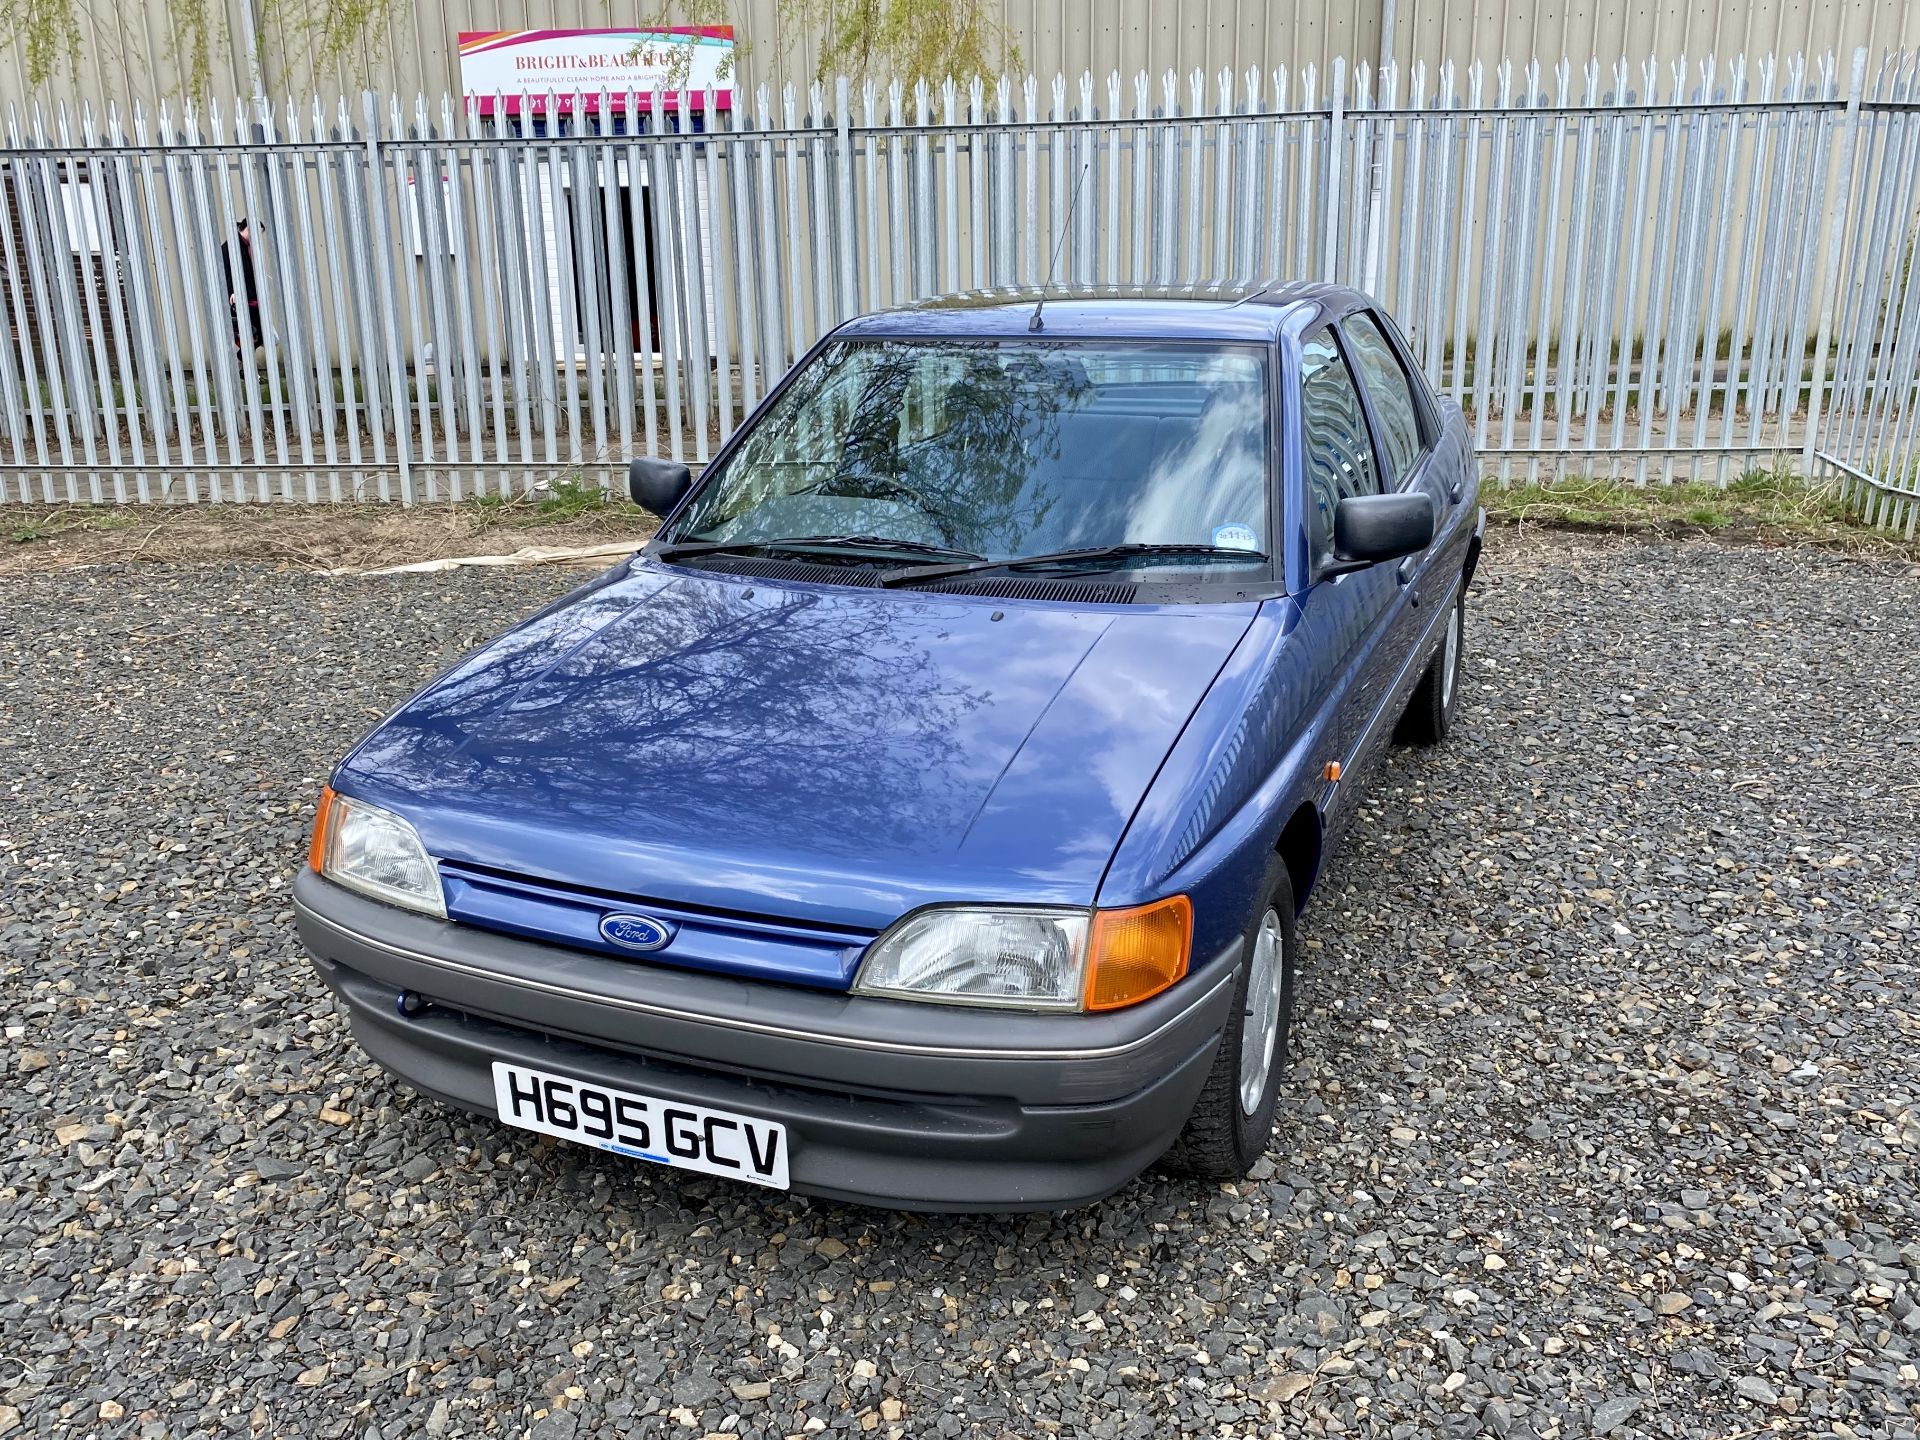 Ford Escort LX1.4 - Image 20 of 54